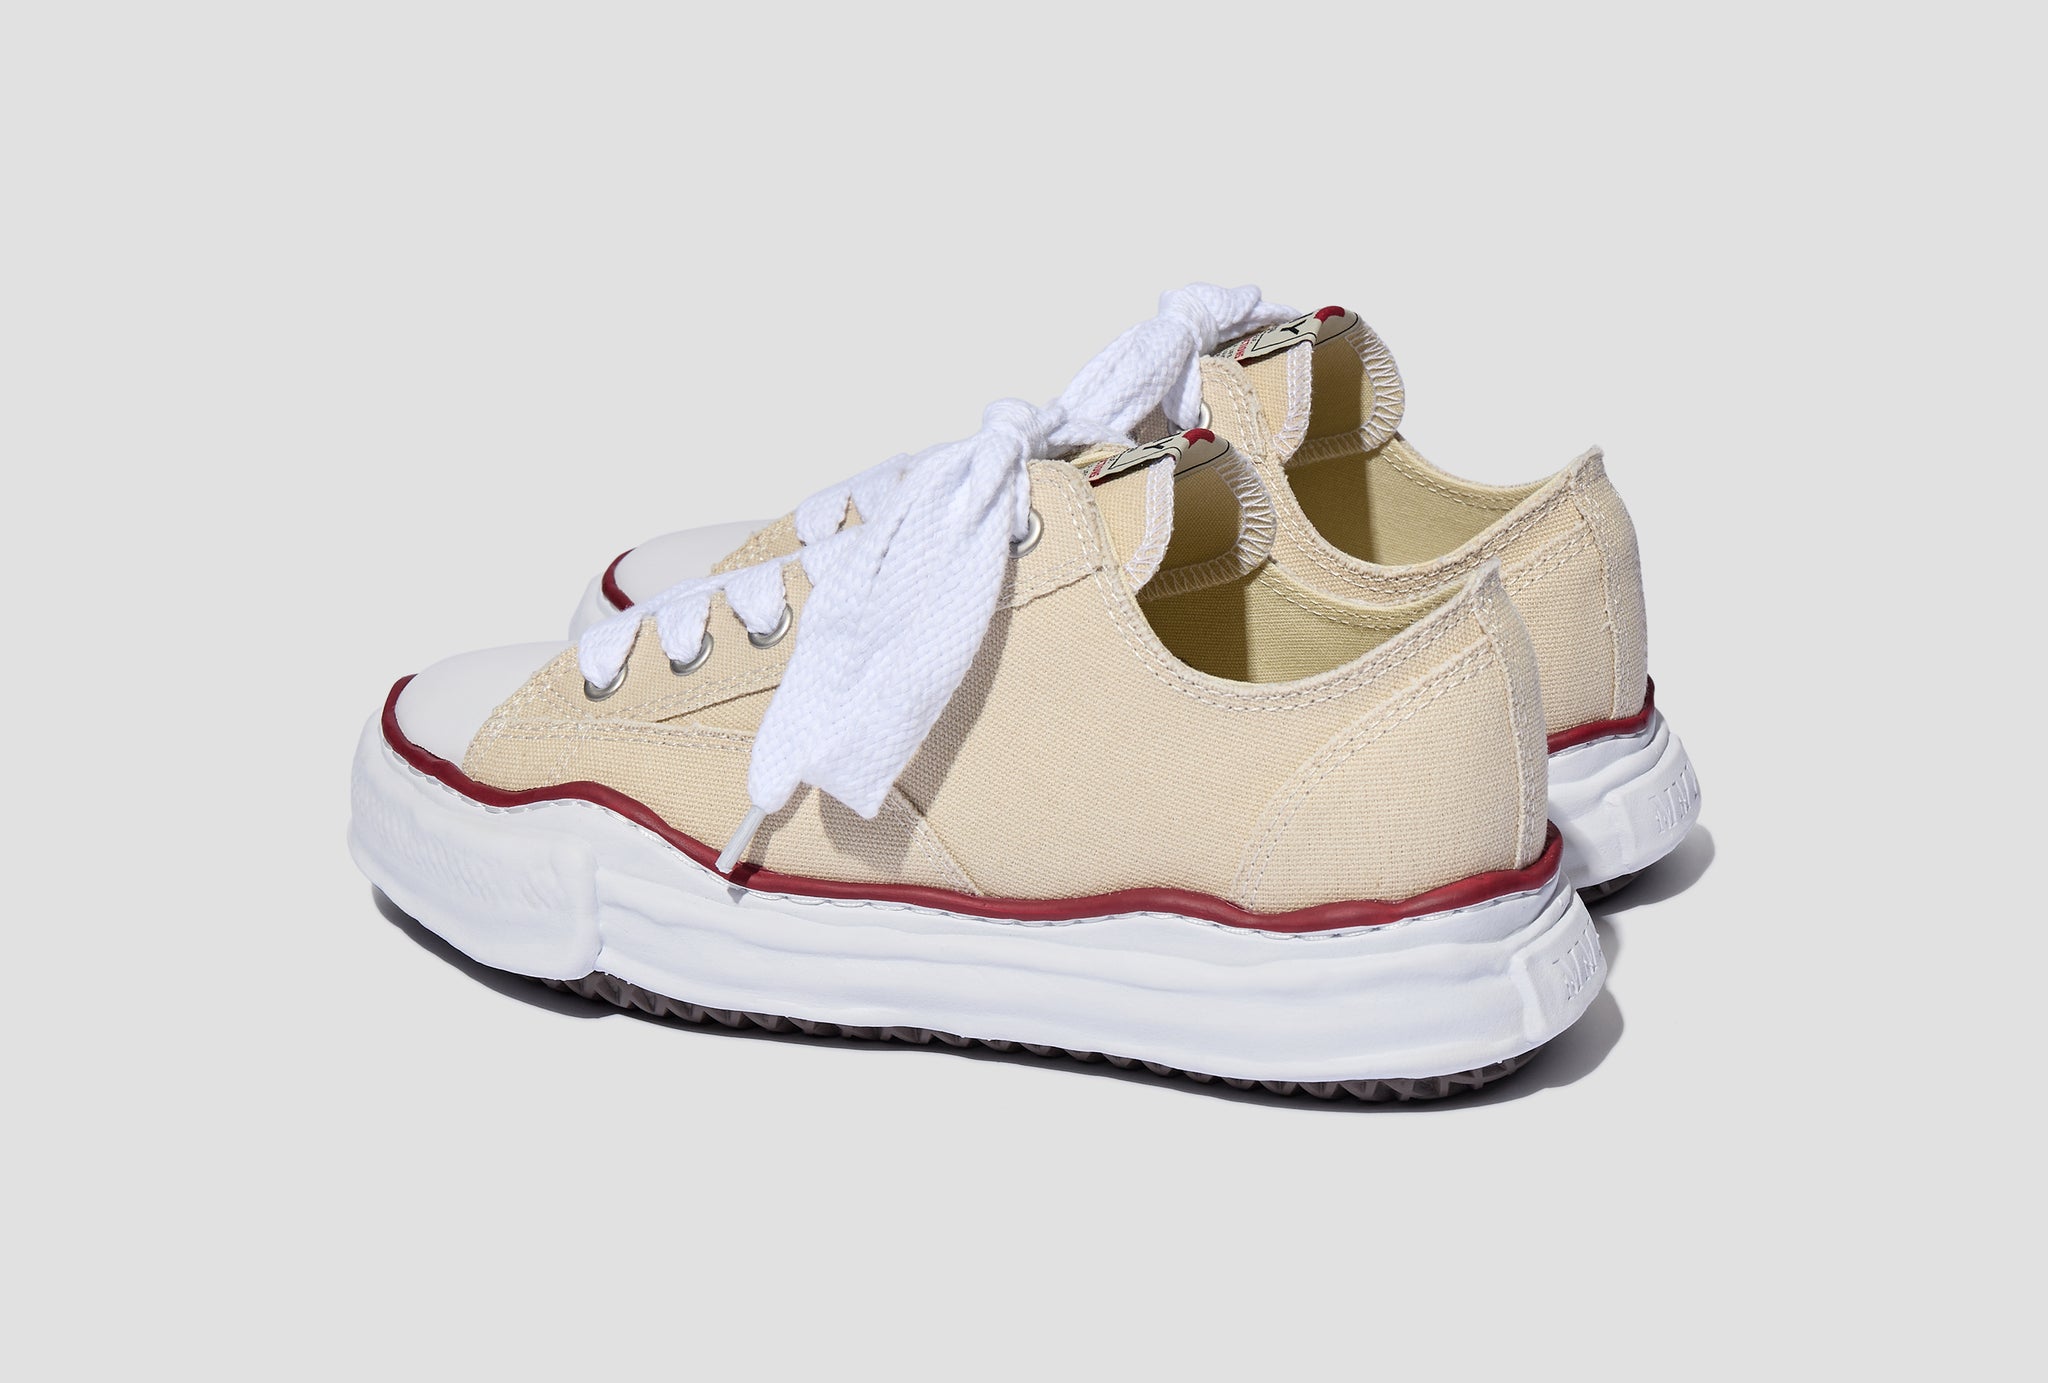 PETERSON LOW - ORIGINAL SOLE CANVAS LOW-TOP SNEAKER A04FW729 Off white